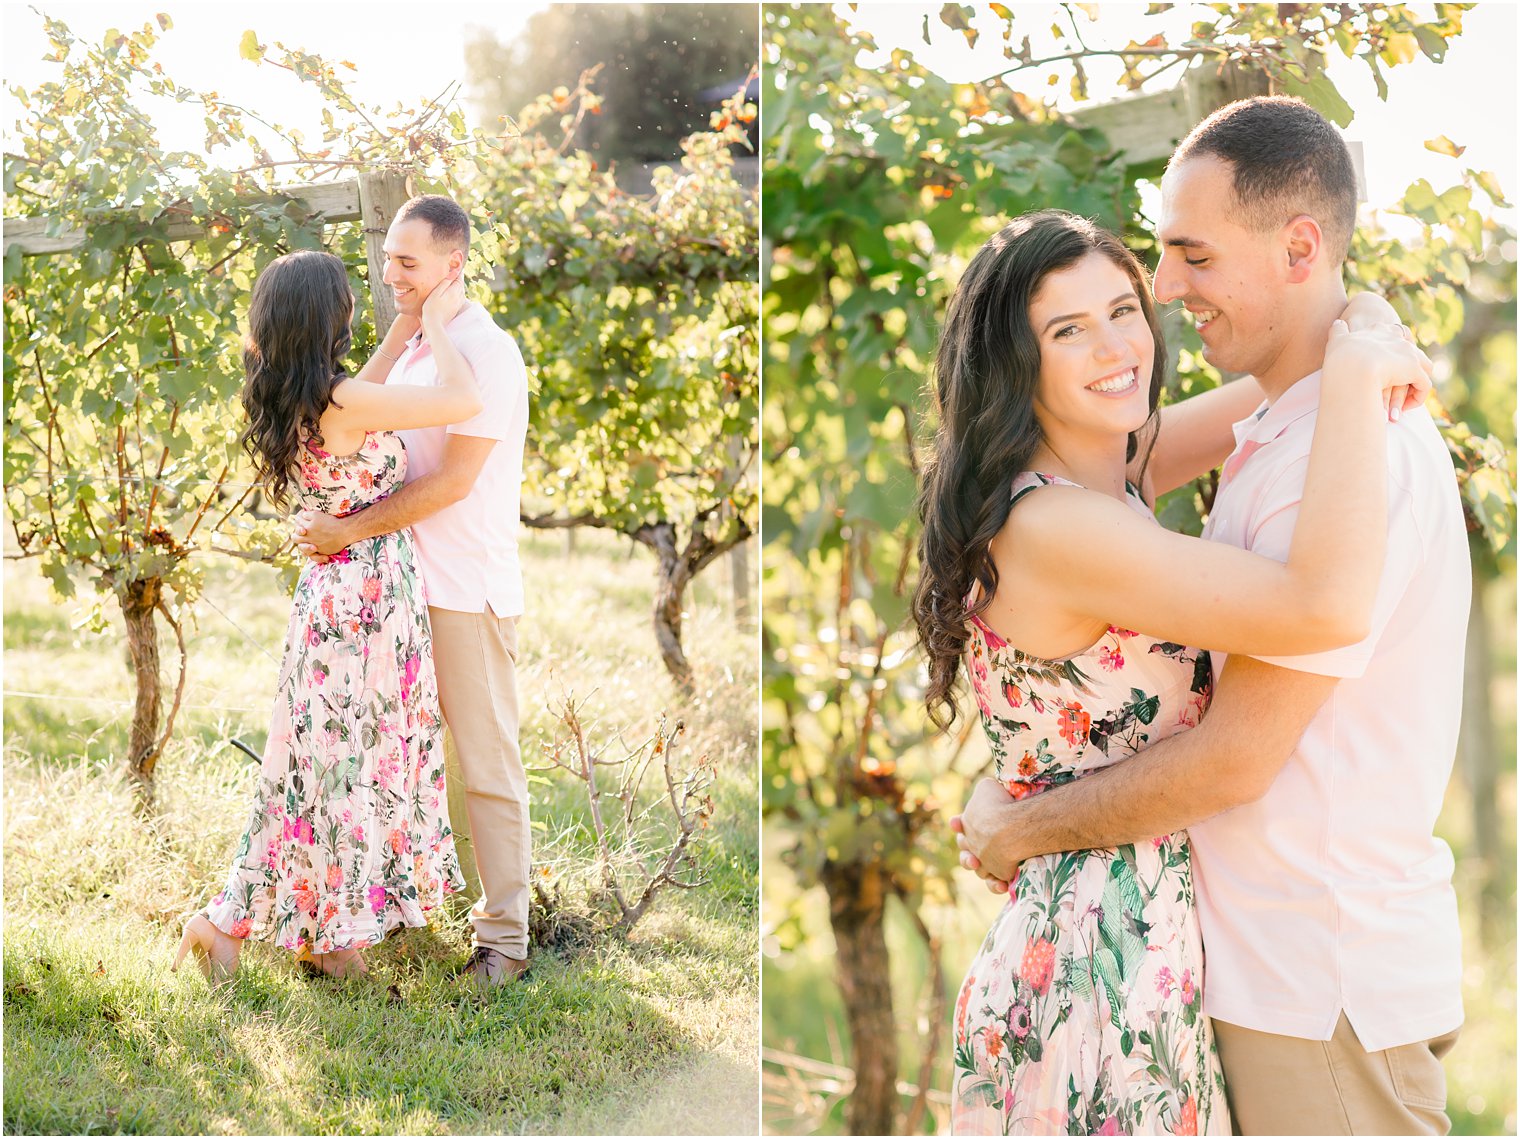 Romantic engagement session in Cape May